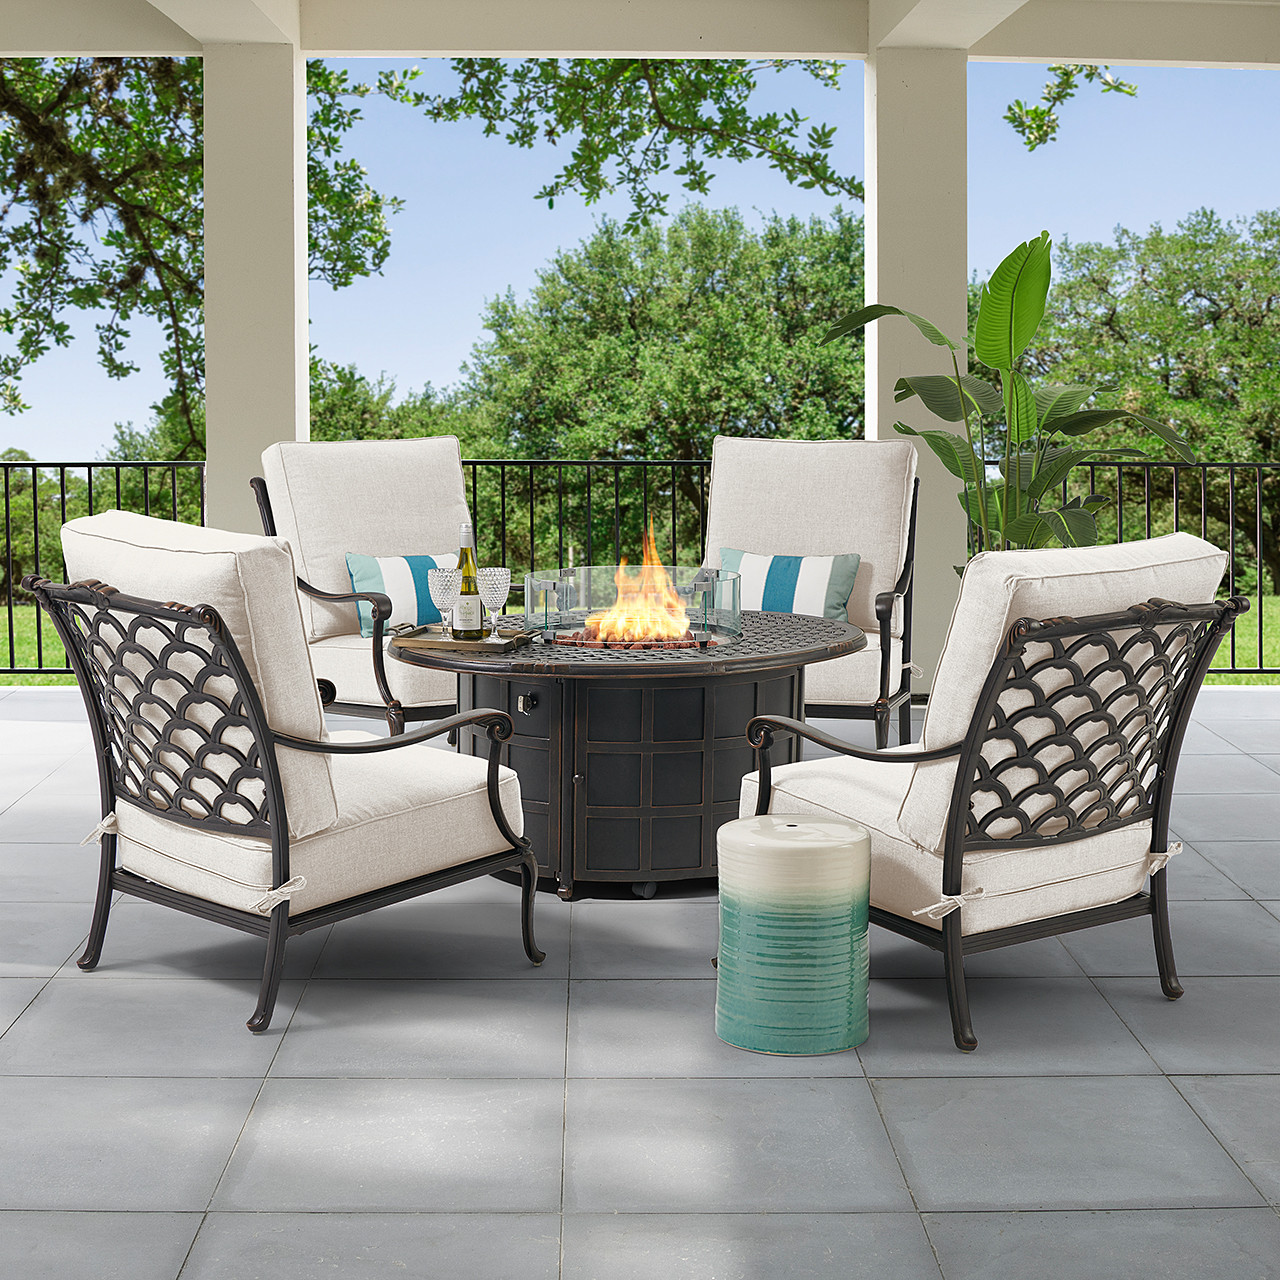 Bordeaux Golden Bronze Cast Aluminum with Cushions 5 Piece Chat Group + 52 x 39 in. Fire Pit Table